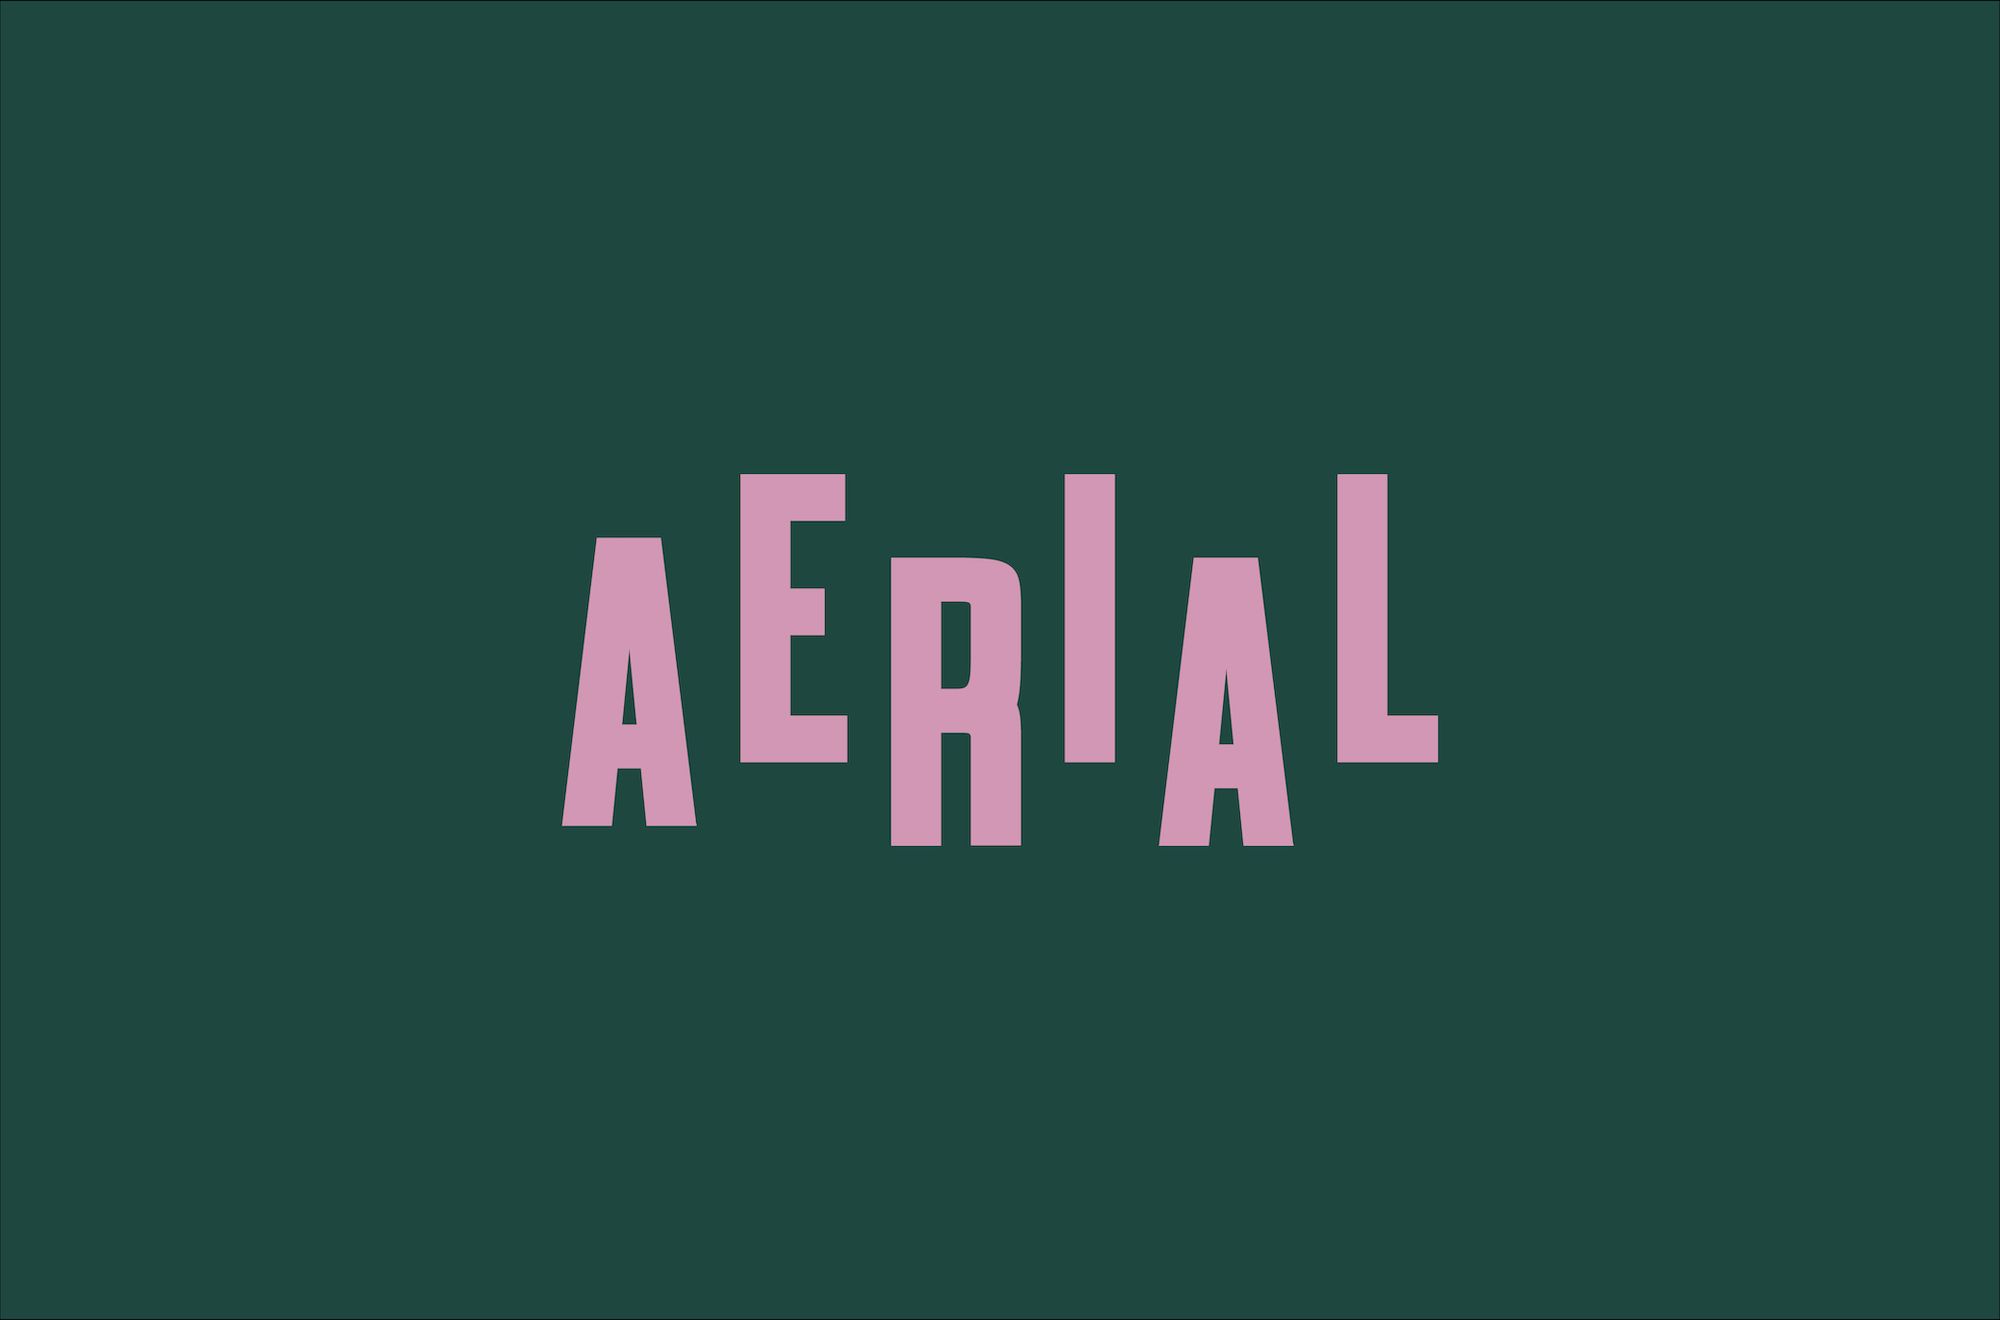 Launch of a new arts festival brand Aerial